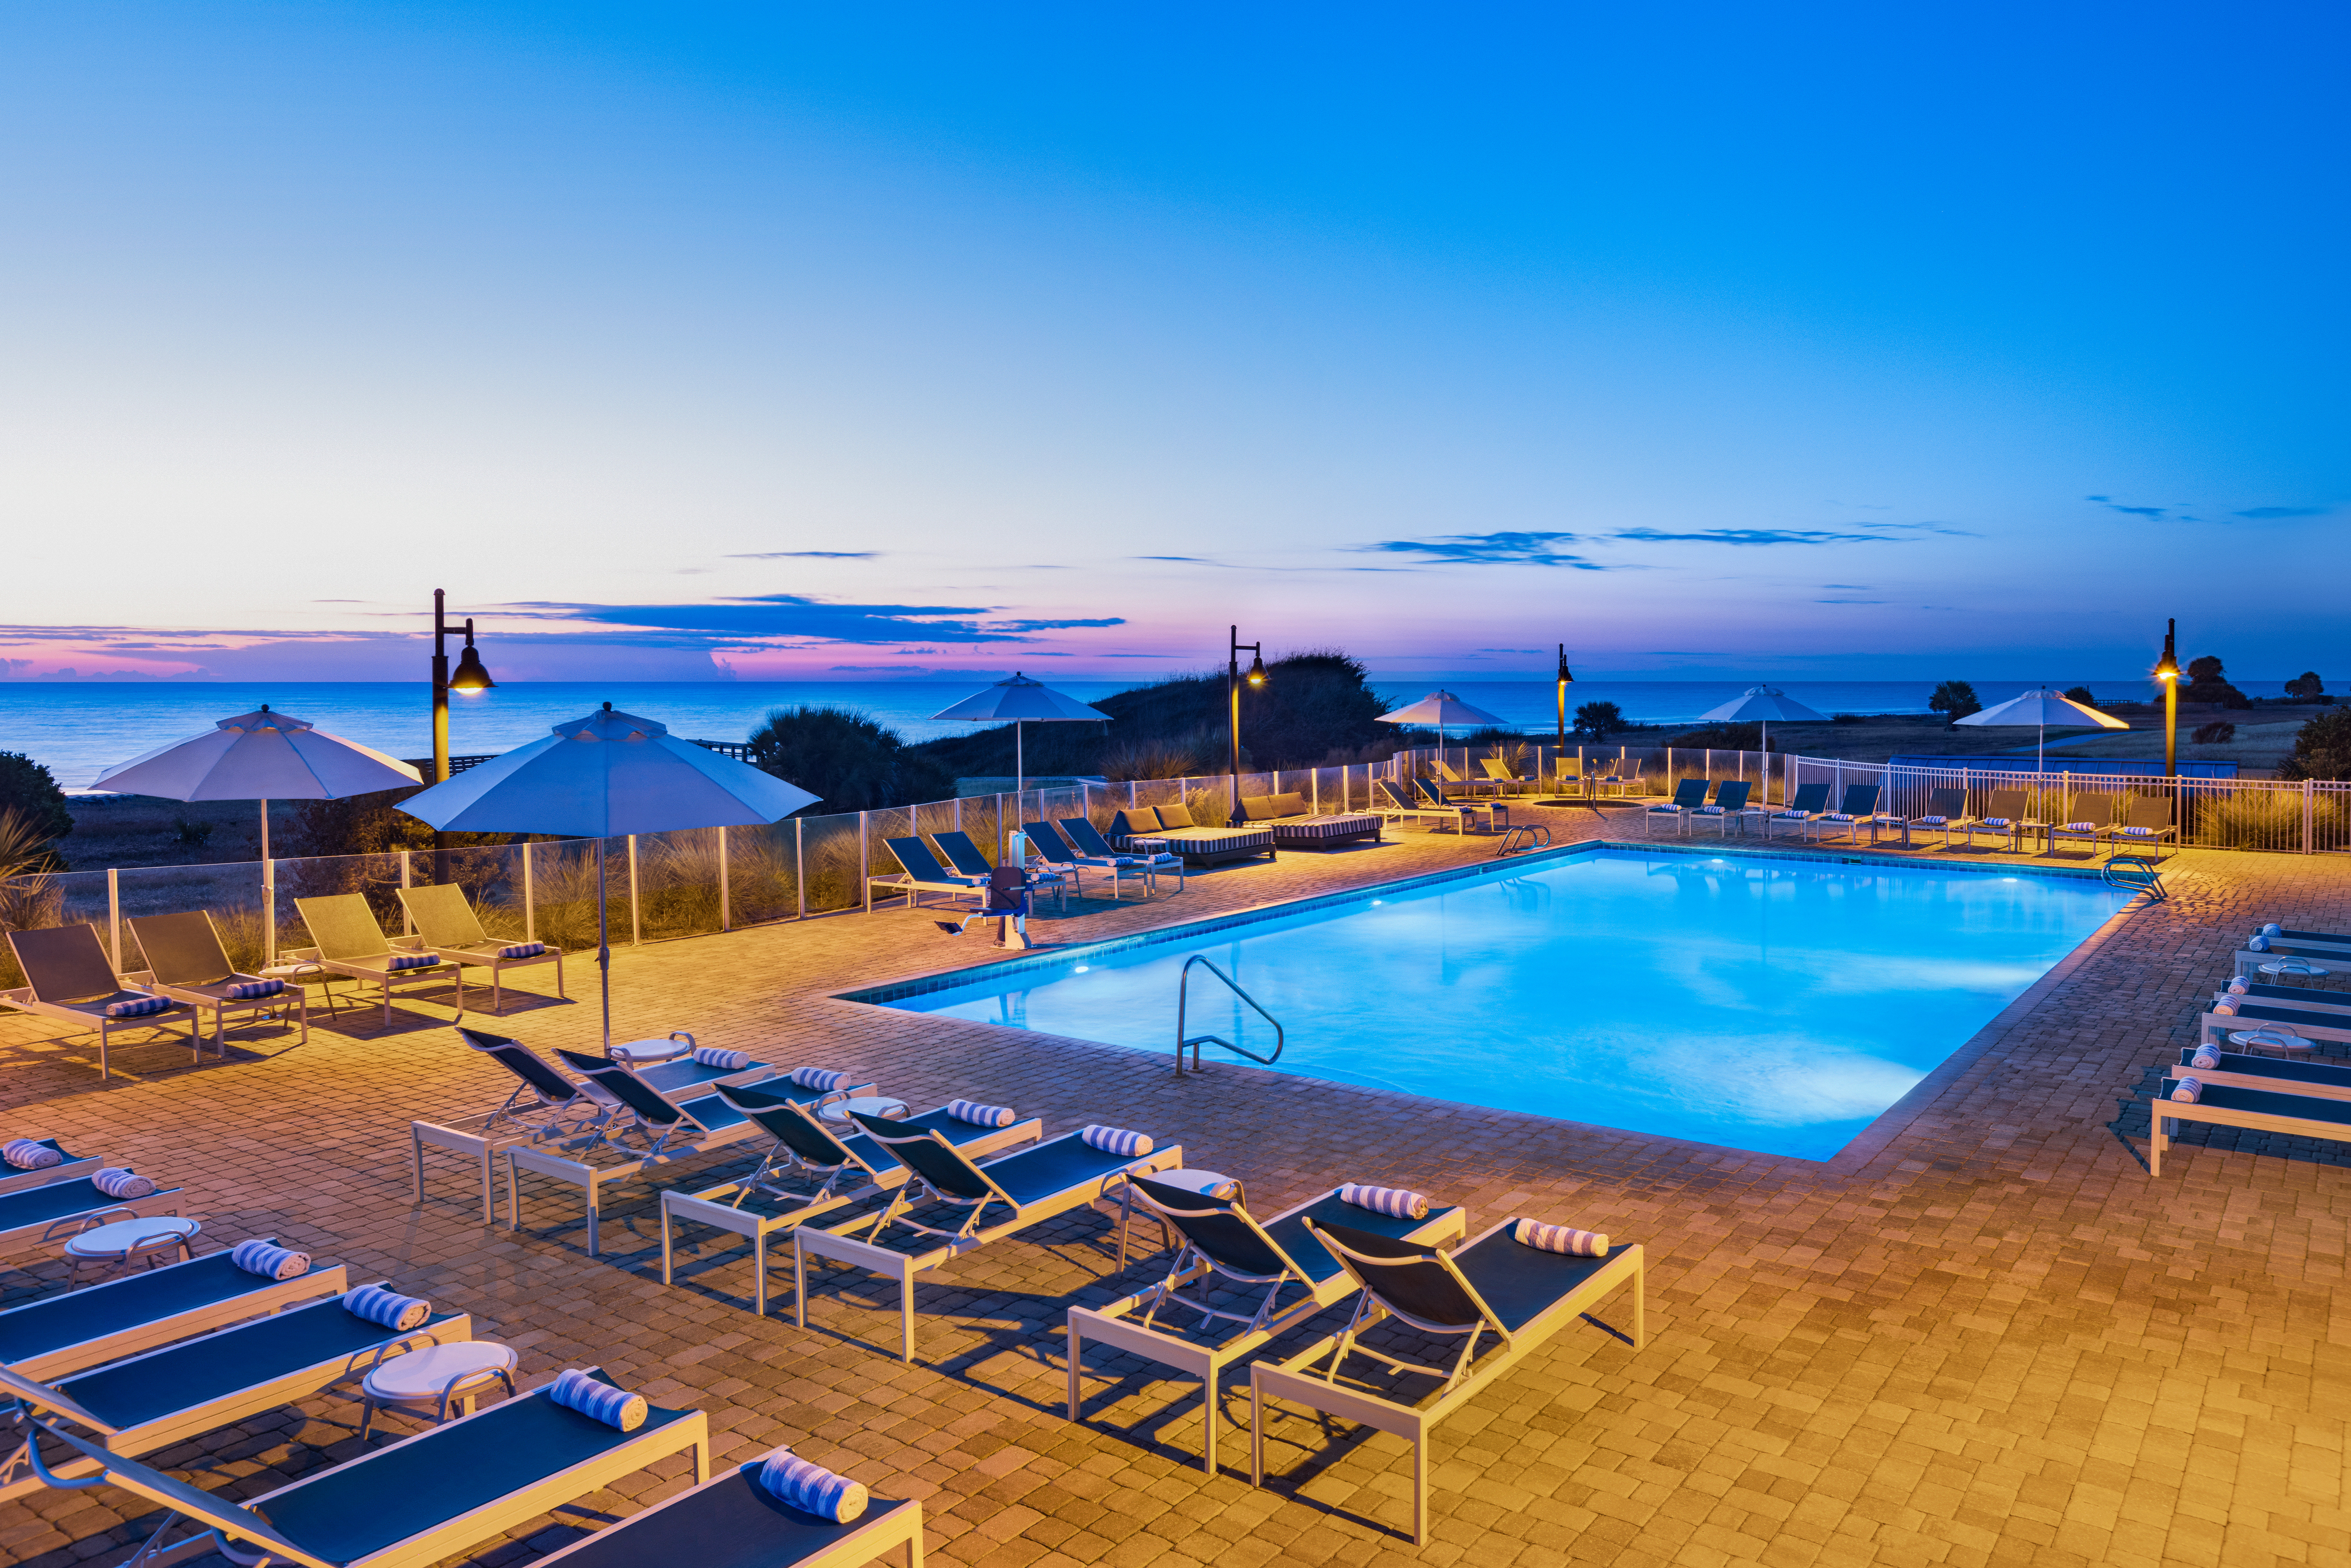 Open until 10pm, you can take in the sunset from our pool 